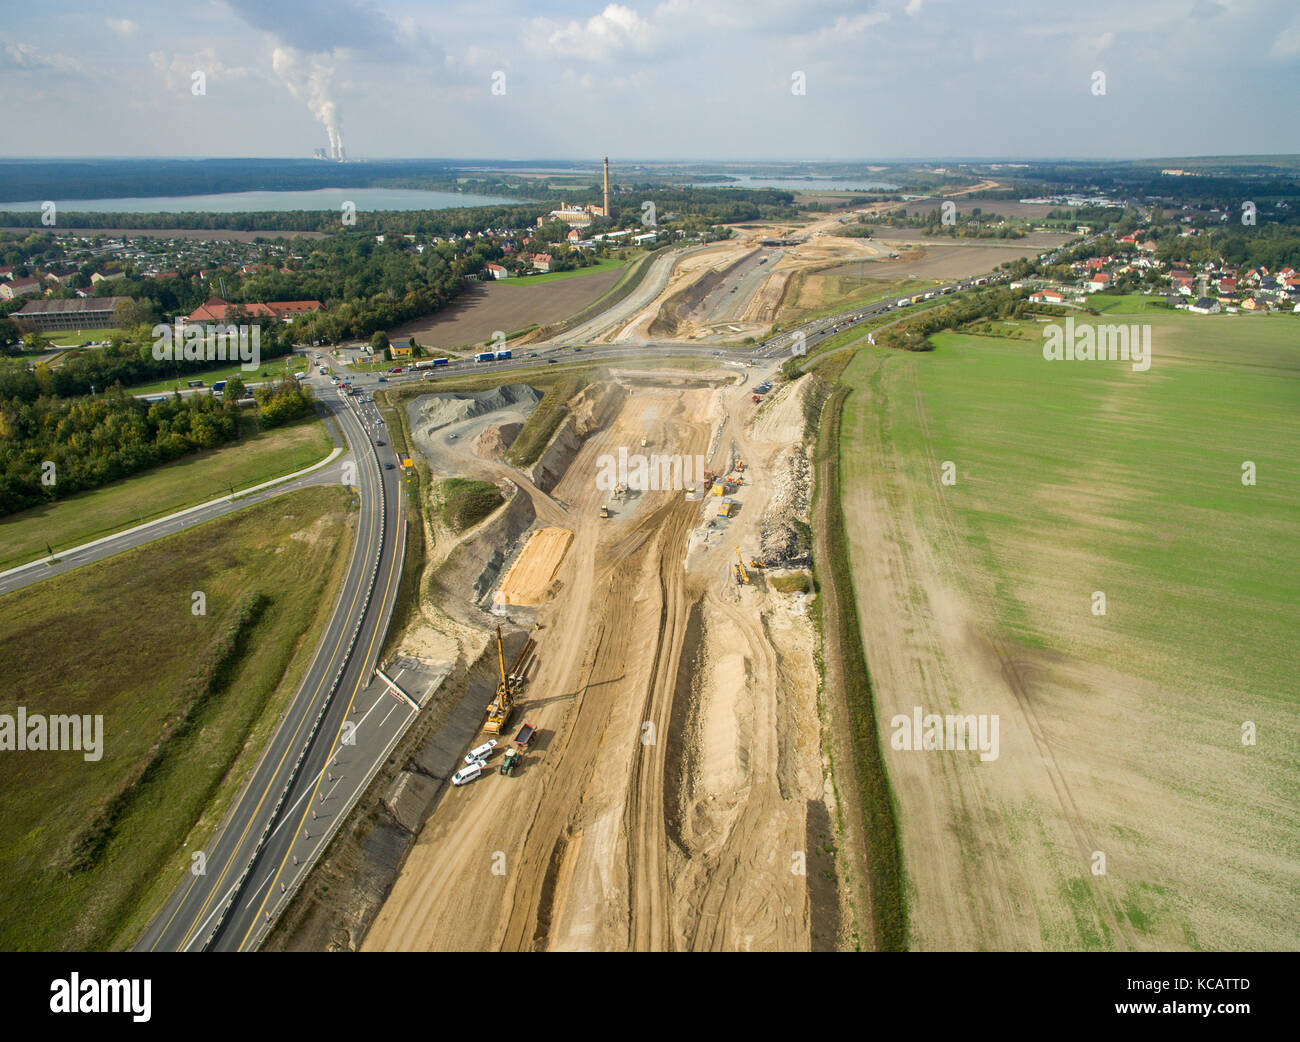 Borna, Germany. 21st Sep, 2017. The construction site for the Borna junction of the future Autobahn A72 motorway, in Borna, Germany, 21 September 2017. The final section of the motorway between Leipzig and Chemnitz is currently under construction (Aerial photo taken using a drone) Credit: Jan Woitas/dpa-Zentralbild/dpa/Alamy Live News Stock Photo